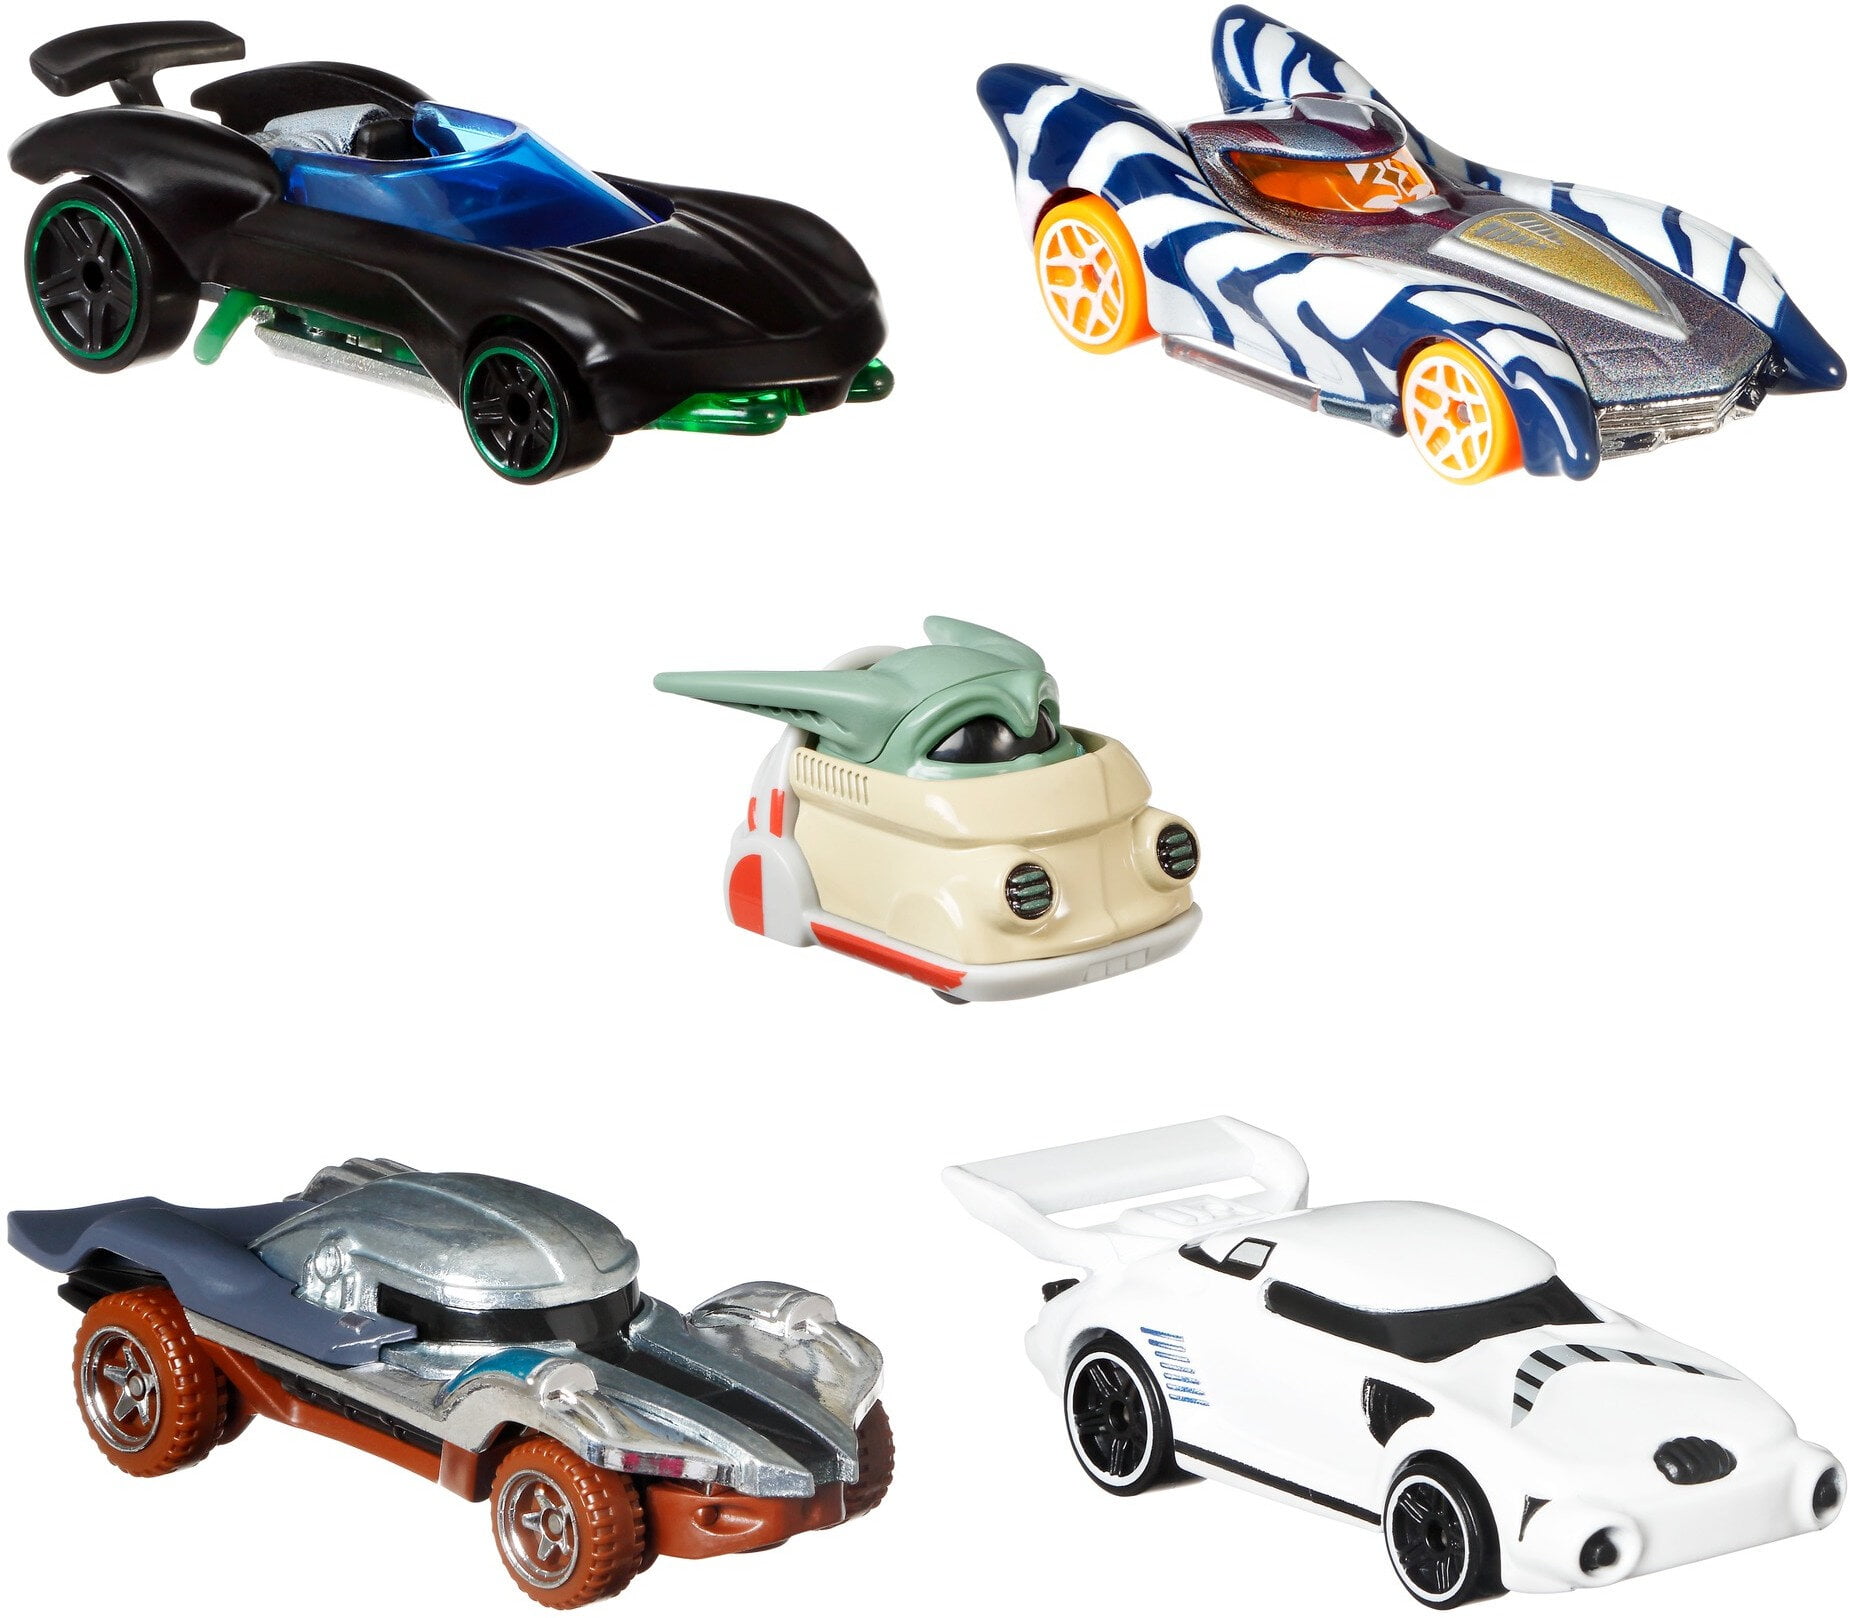 Pick a style Hot Wheels Star Wars Character Cars 1:64 Scale Die-cast Vehicles 